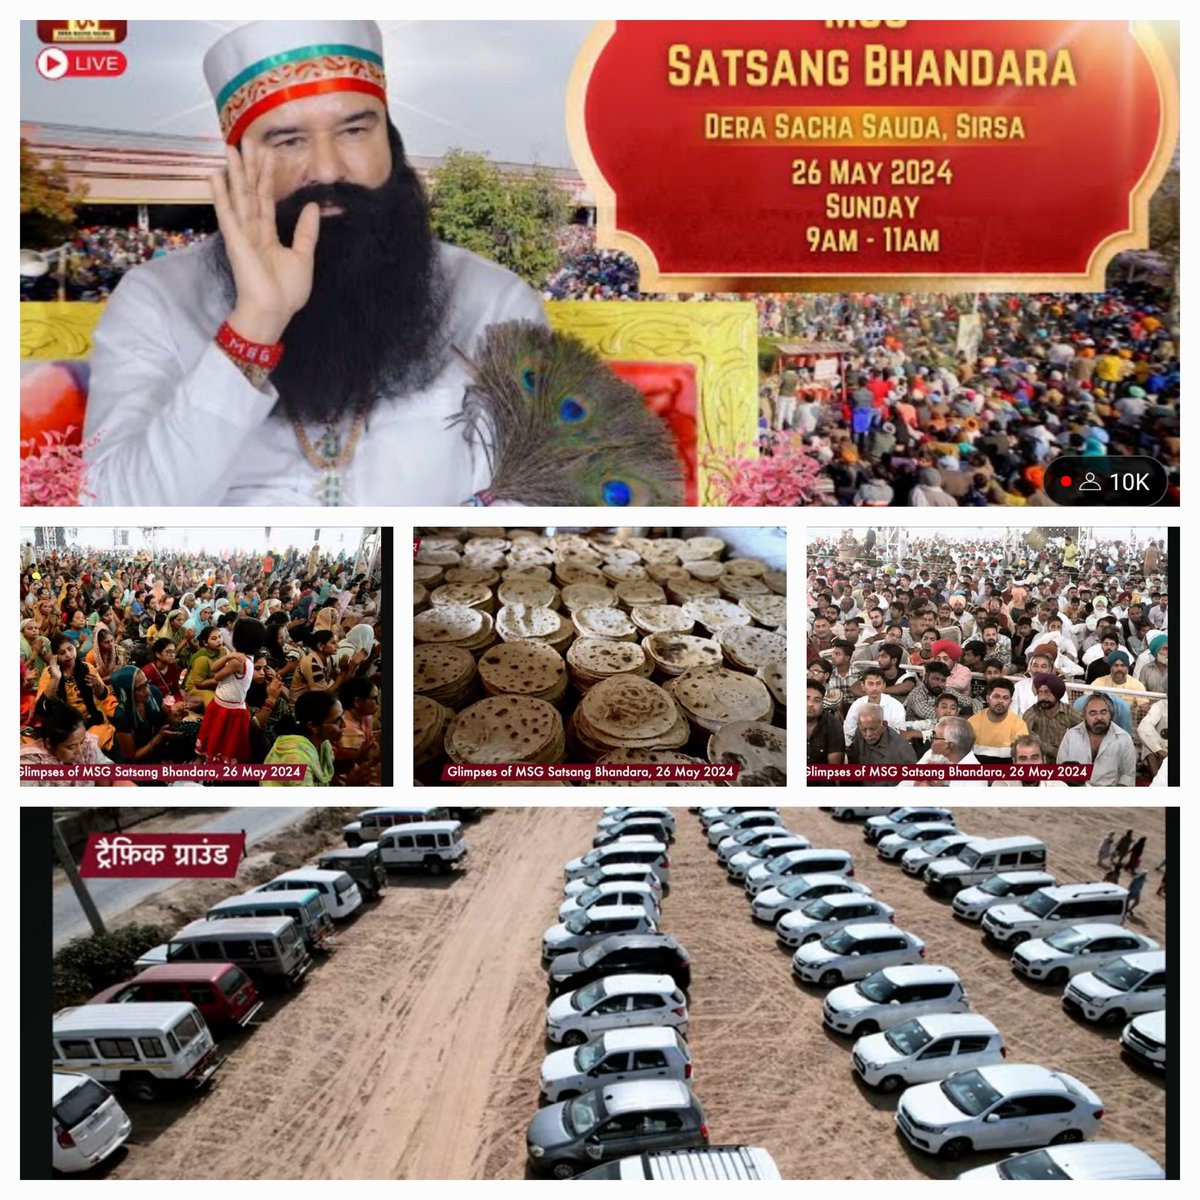 Special Satsang Bhandara was celebrated today at Dera Sacha Sauda,Sirsa. Millions gathered to listen the precious sermons by Saint MSG Insan. Dowry free marriages were held &new clothes were distributed to 76 needy children.
#SoulfulSatsangBhandara